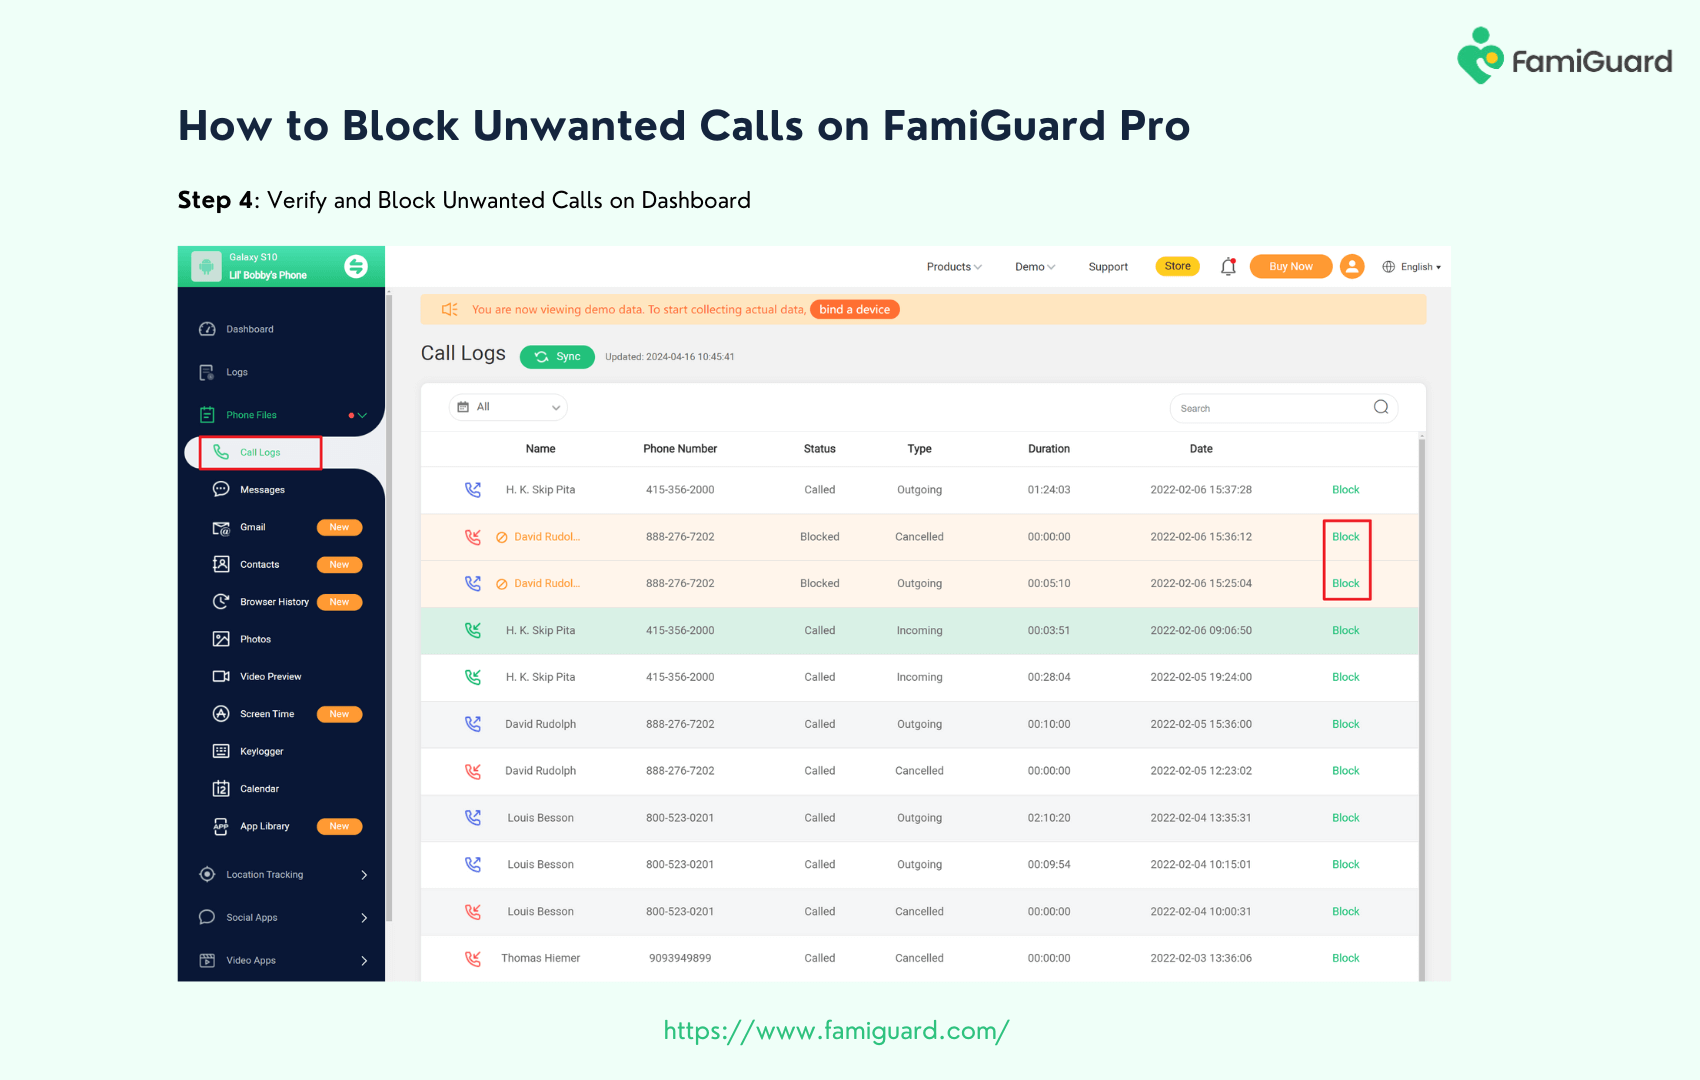 Verify and Block Contacts on FamiGuard Pro